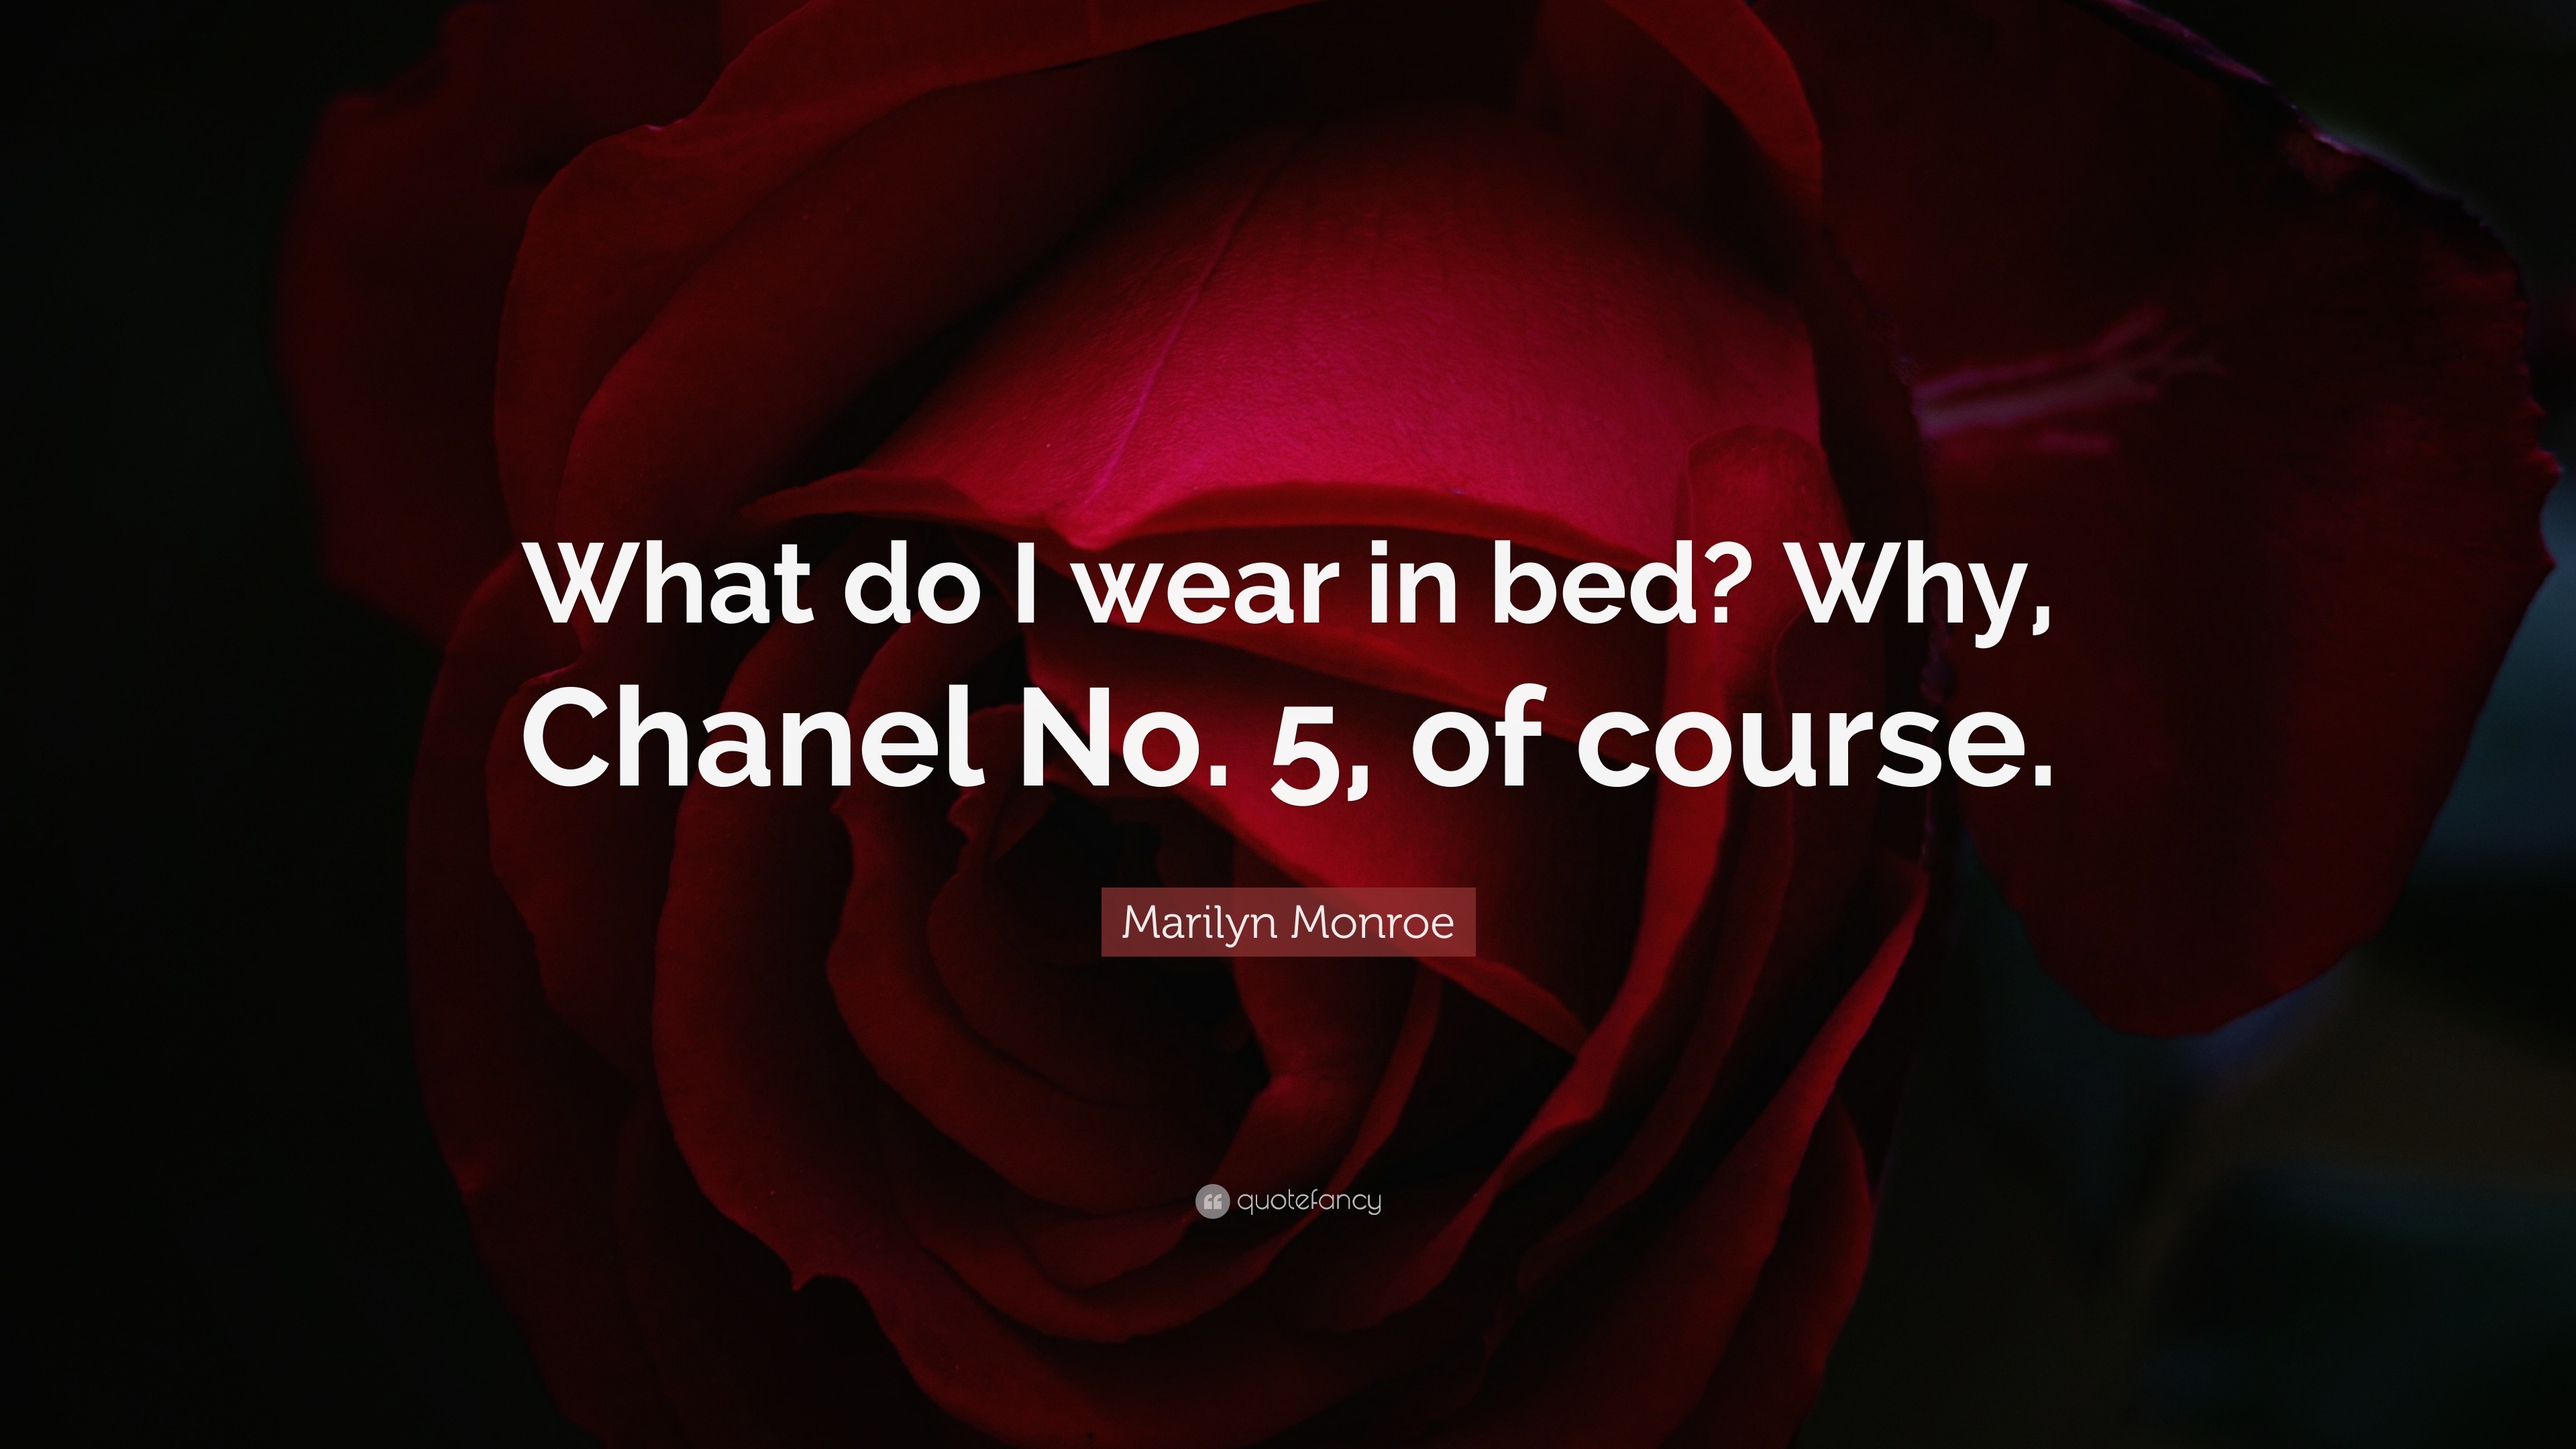 Listen to Marilyn Monroe talk about Chanel No 5  Telegraph